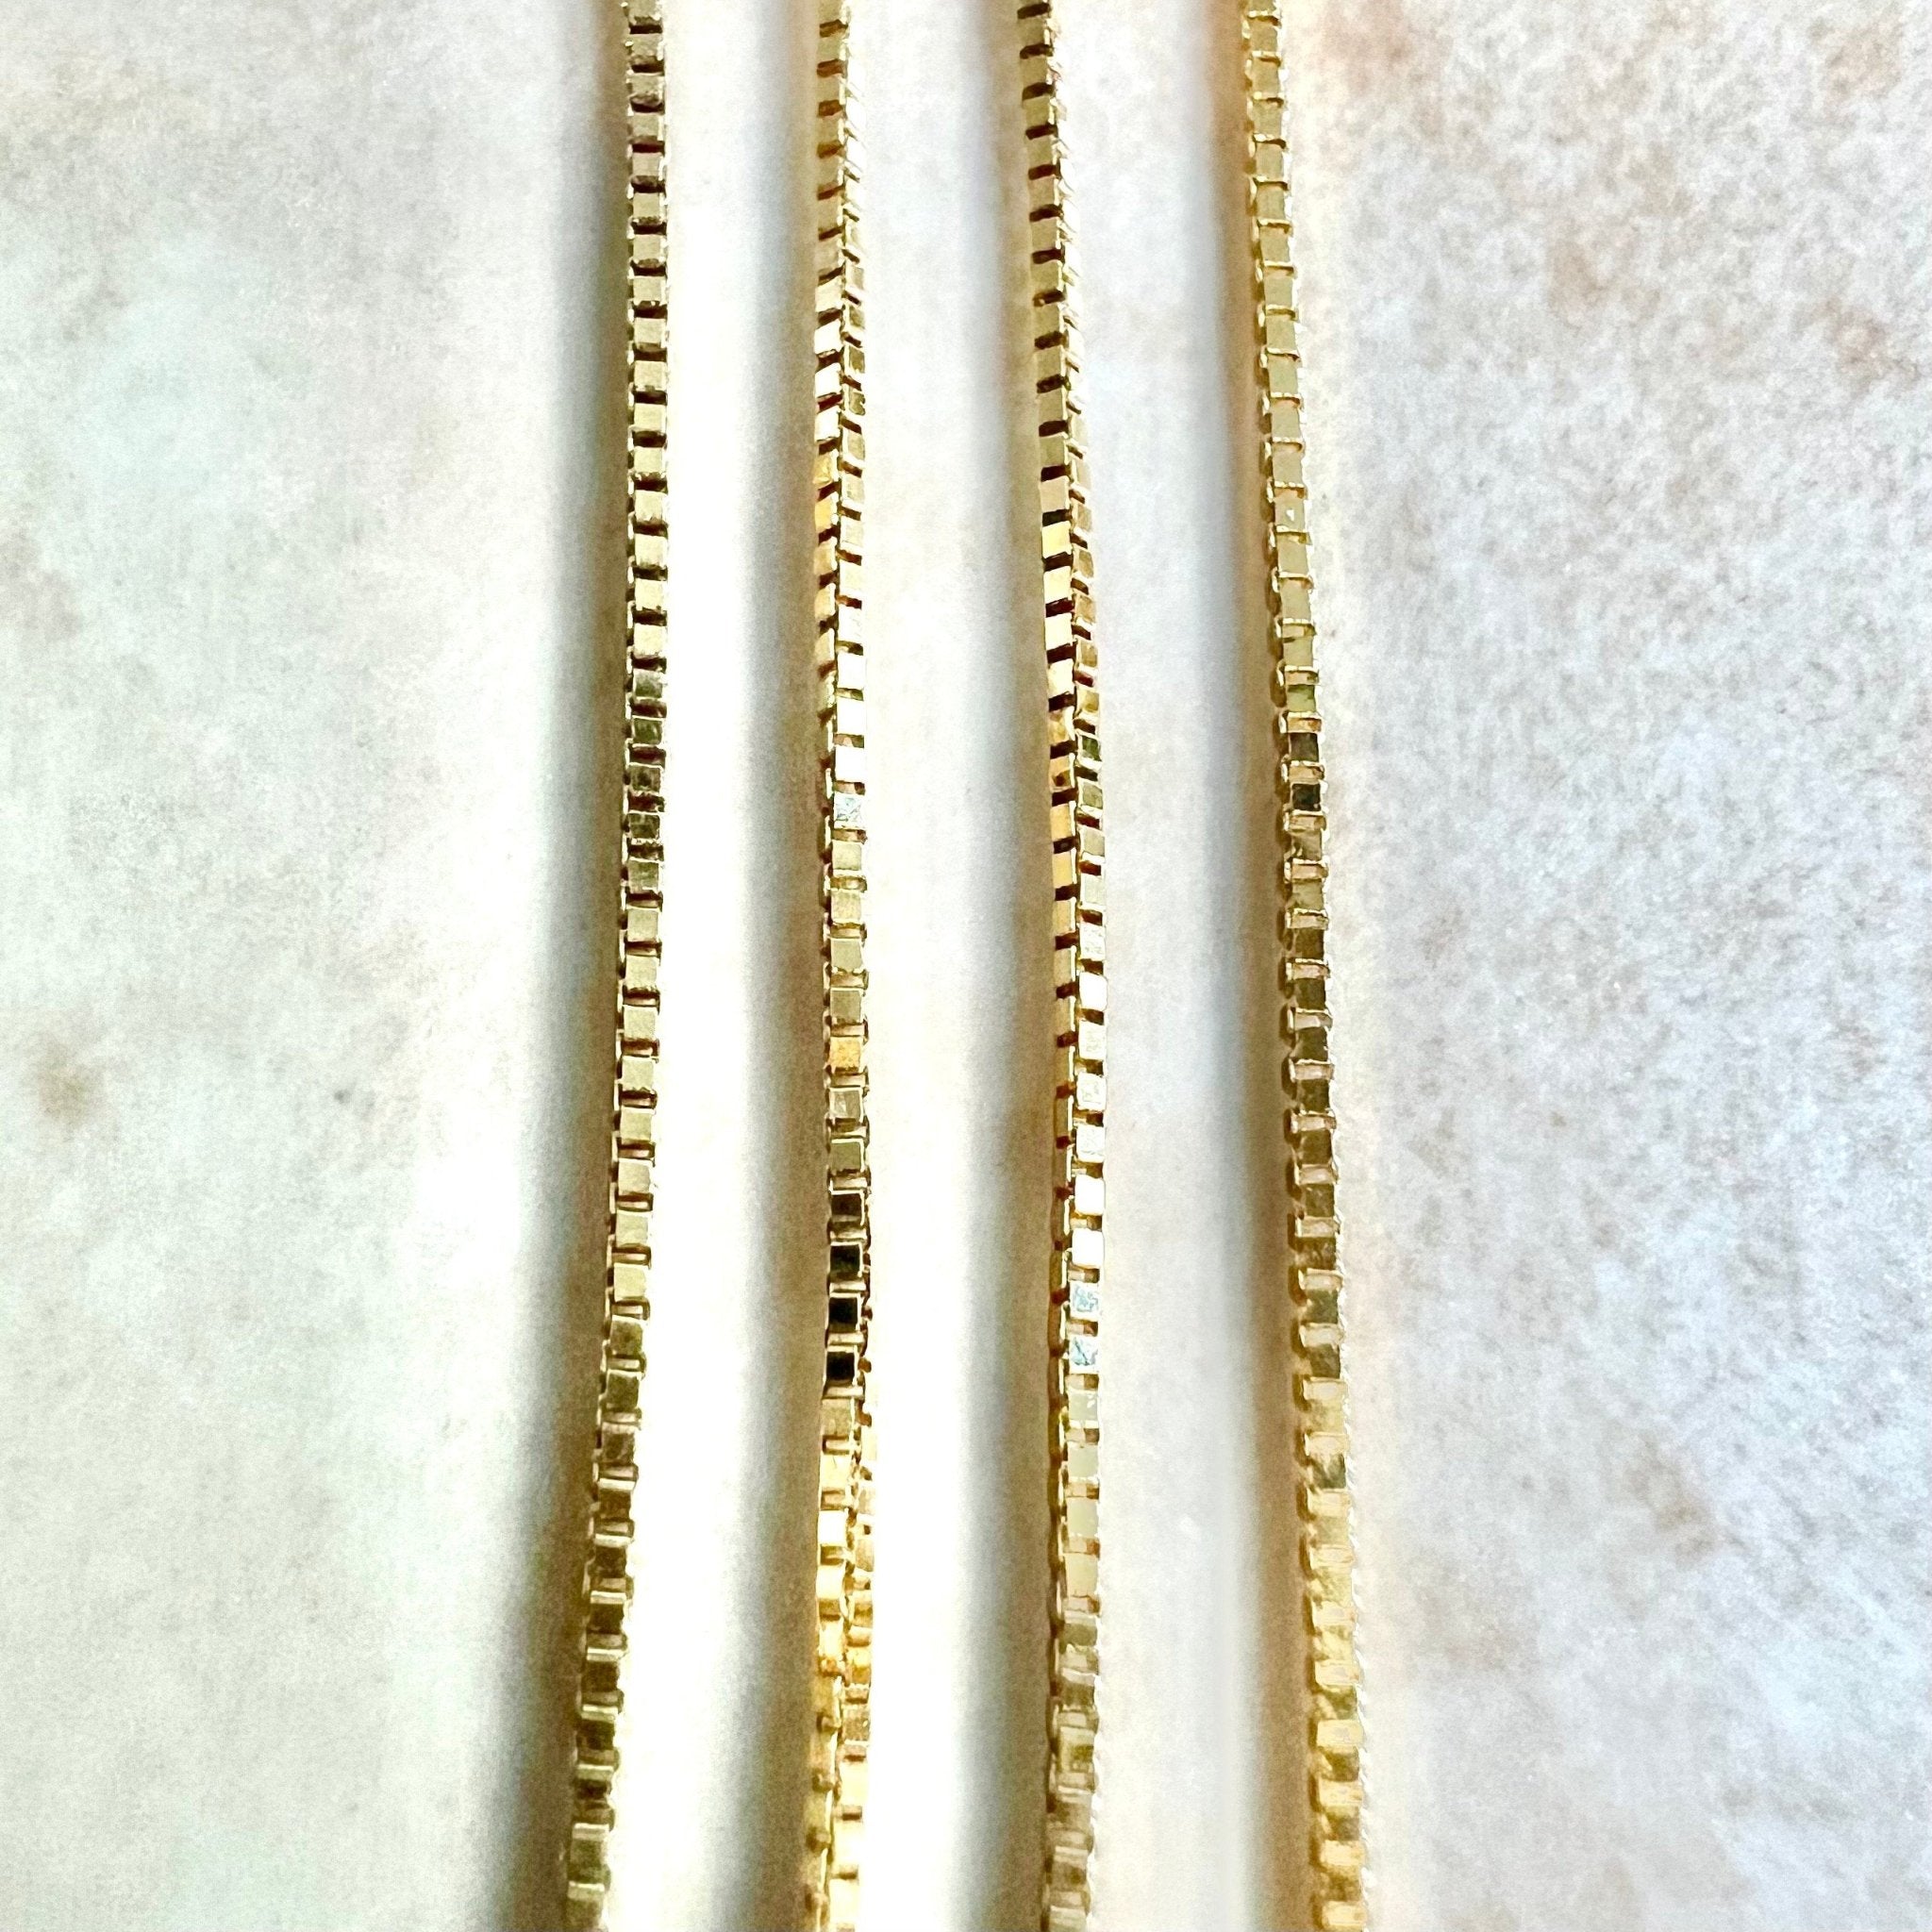 21K 875 Yellow Real Gold Women's Rope Chain Necklace 16” Long 6g 3mm | eBay